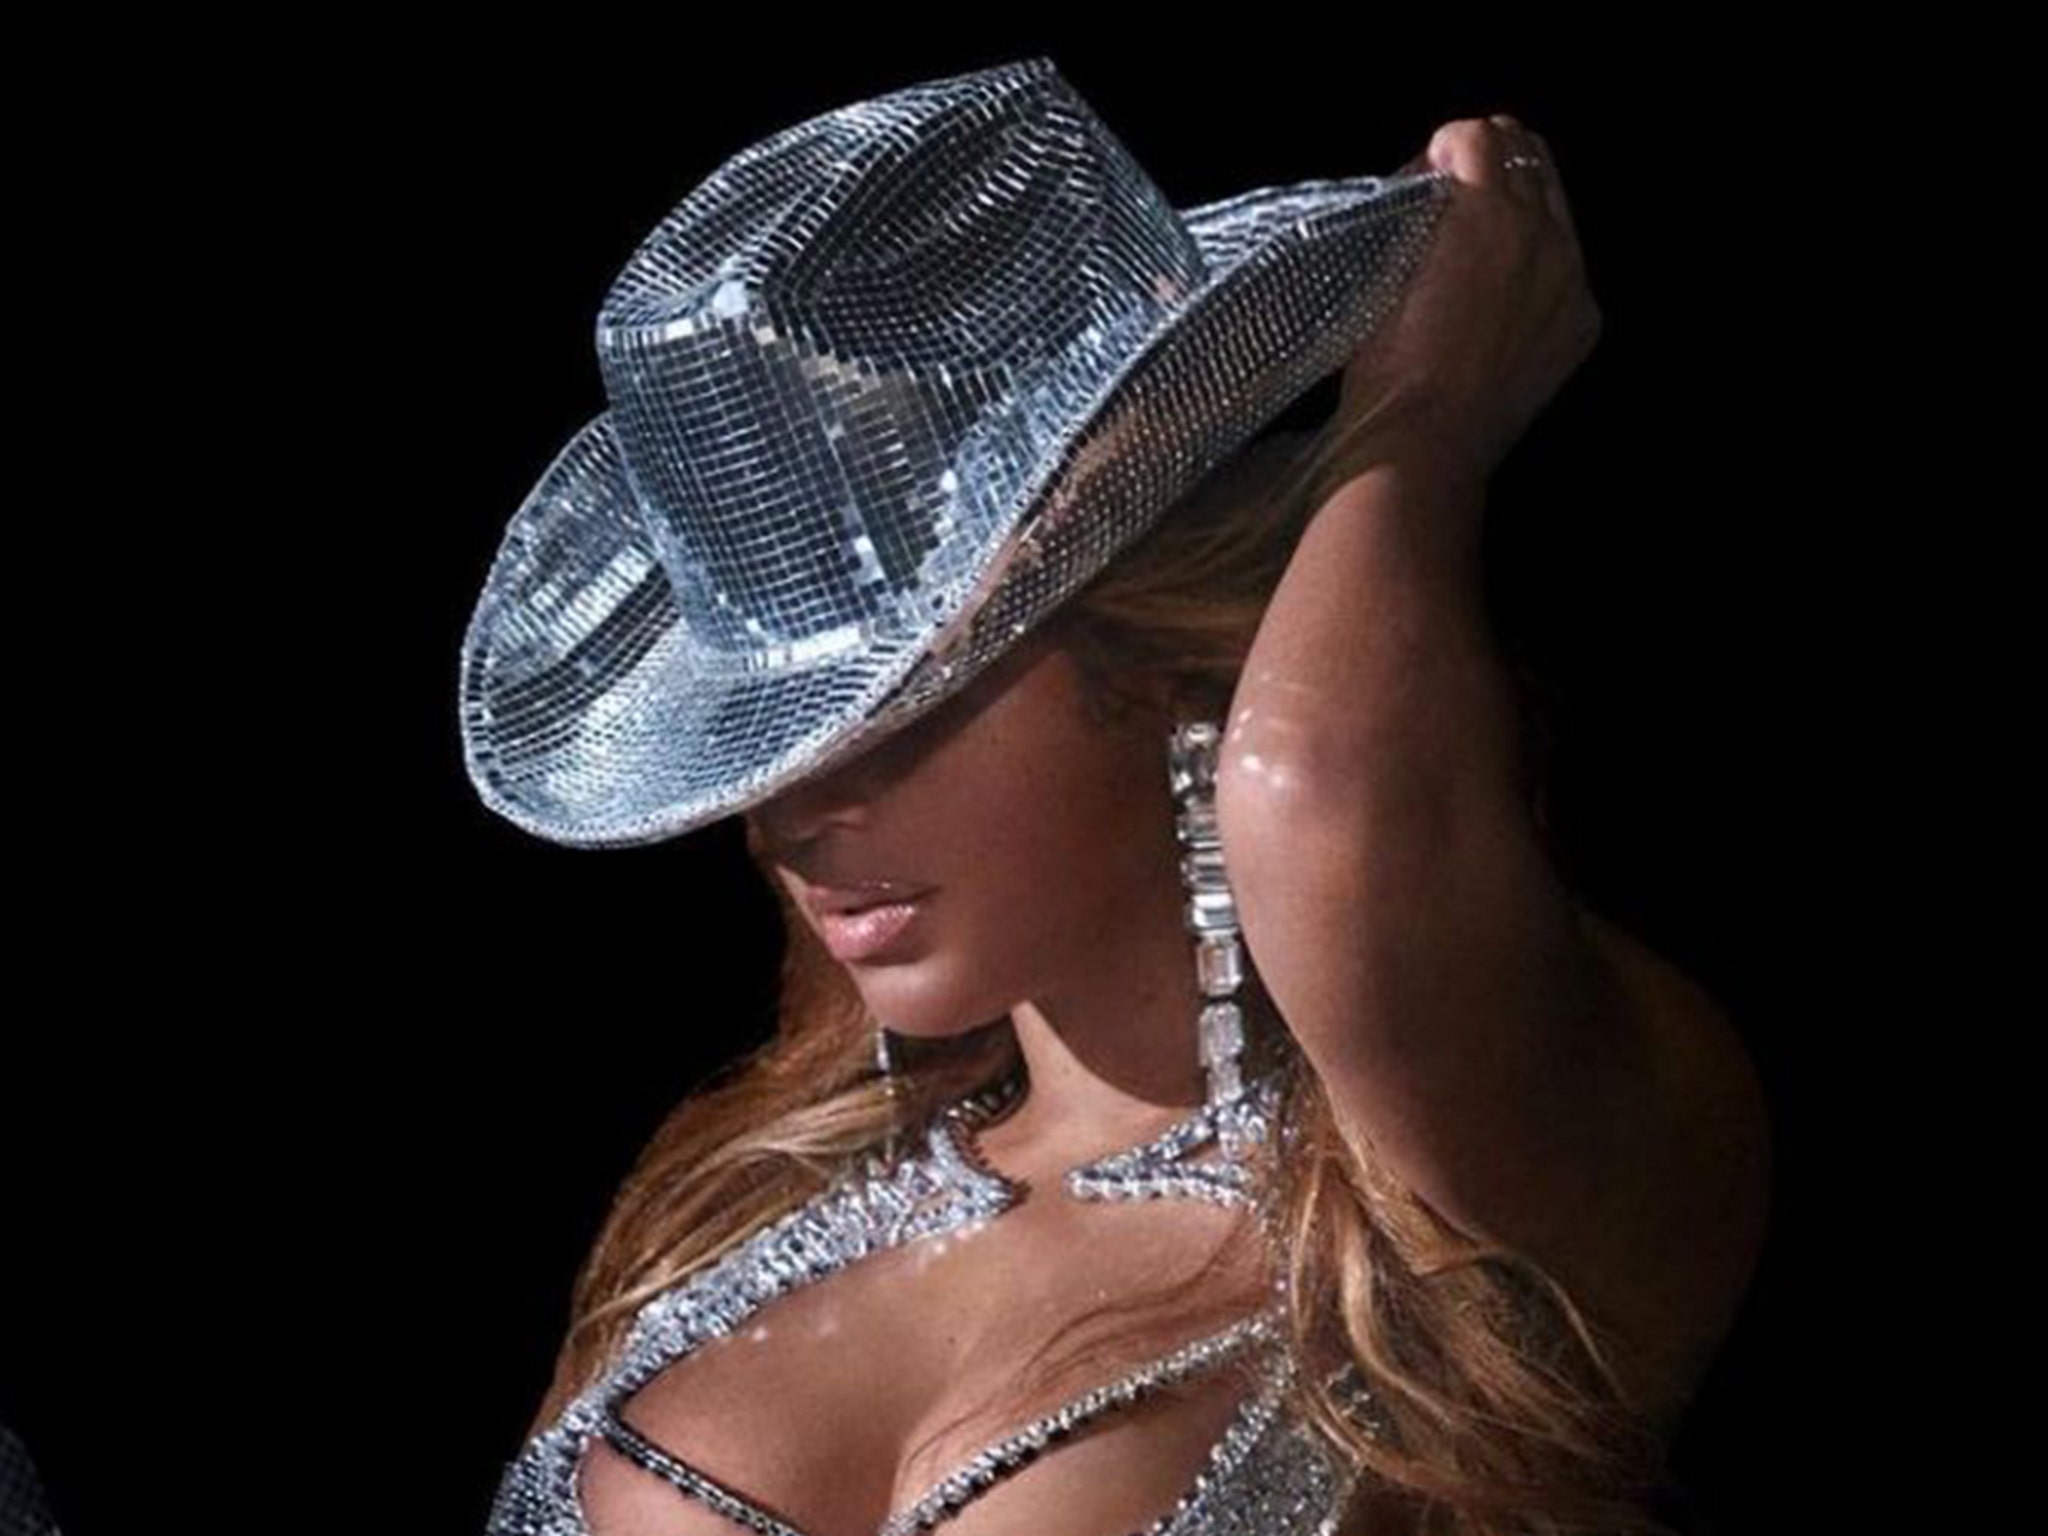 Beyoncé Disco Ball Cowboy Hat Sells Out,  Shop Bombarded With Orders